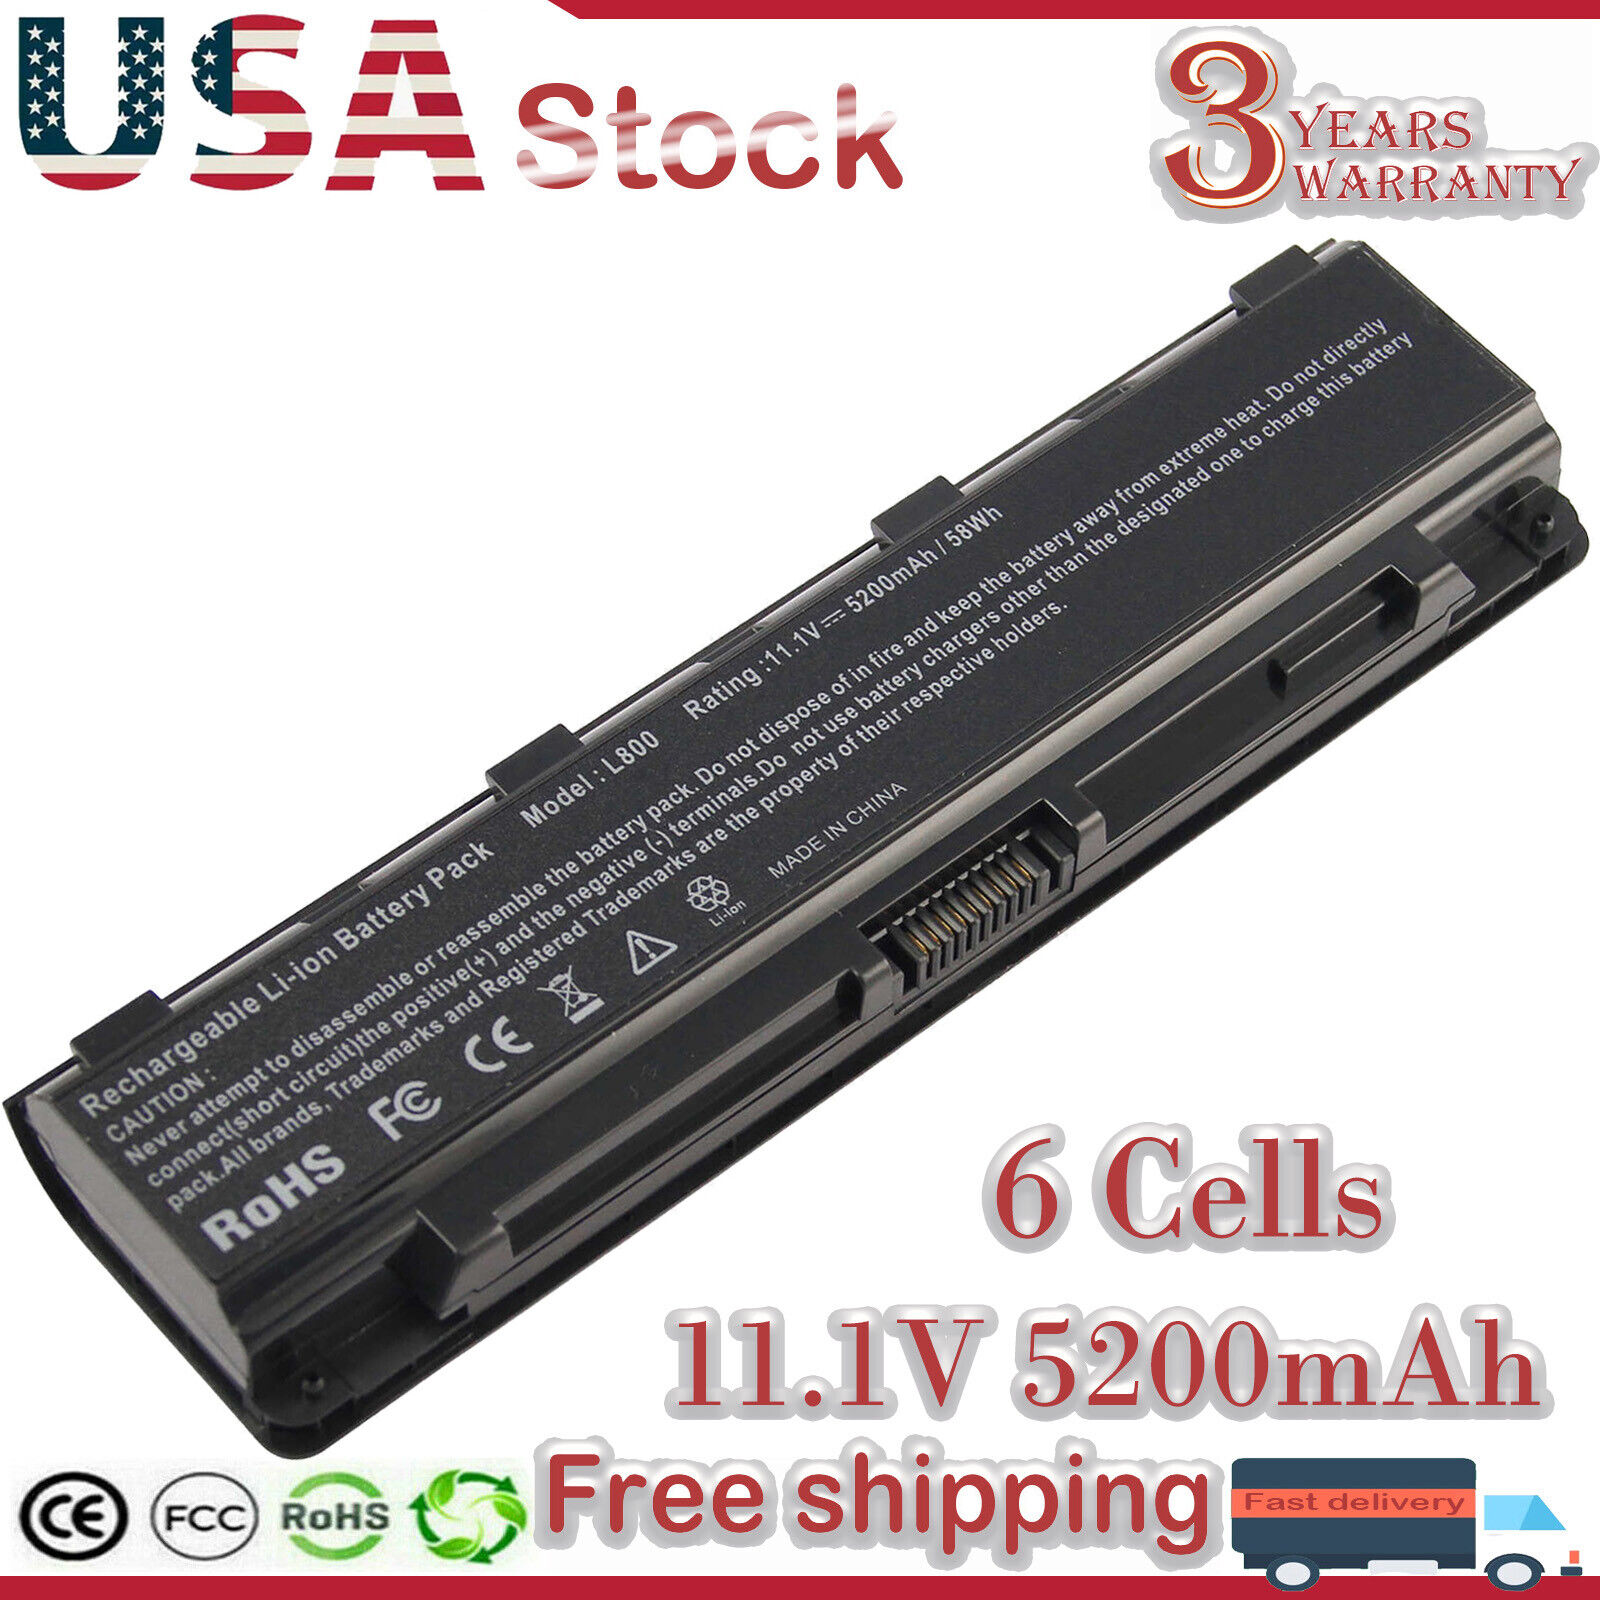 Laptop Battery For Toshiba Satellite P75-A7100 P75-A7200 S855-S5378 S855D-S5148